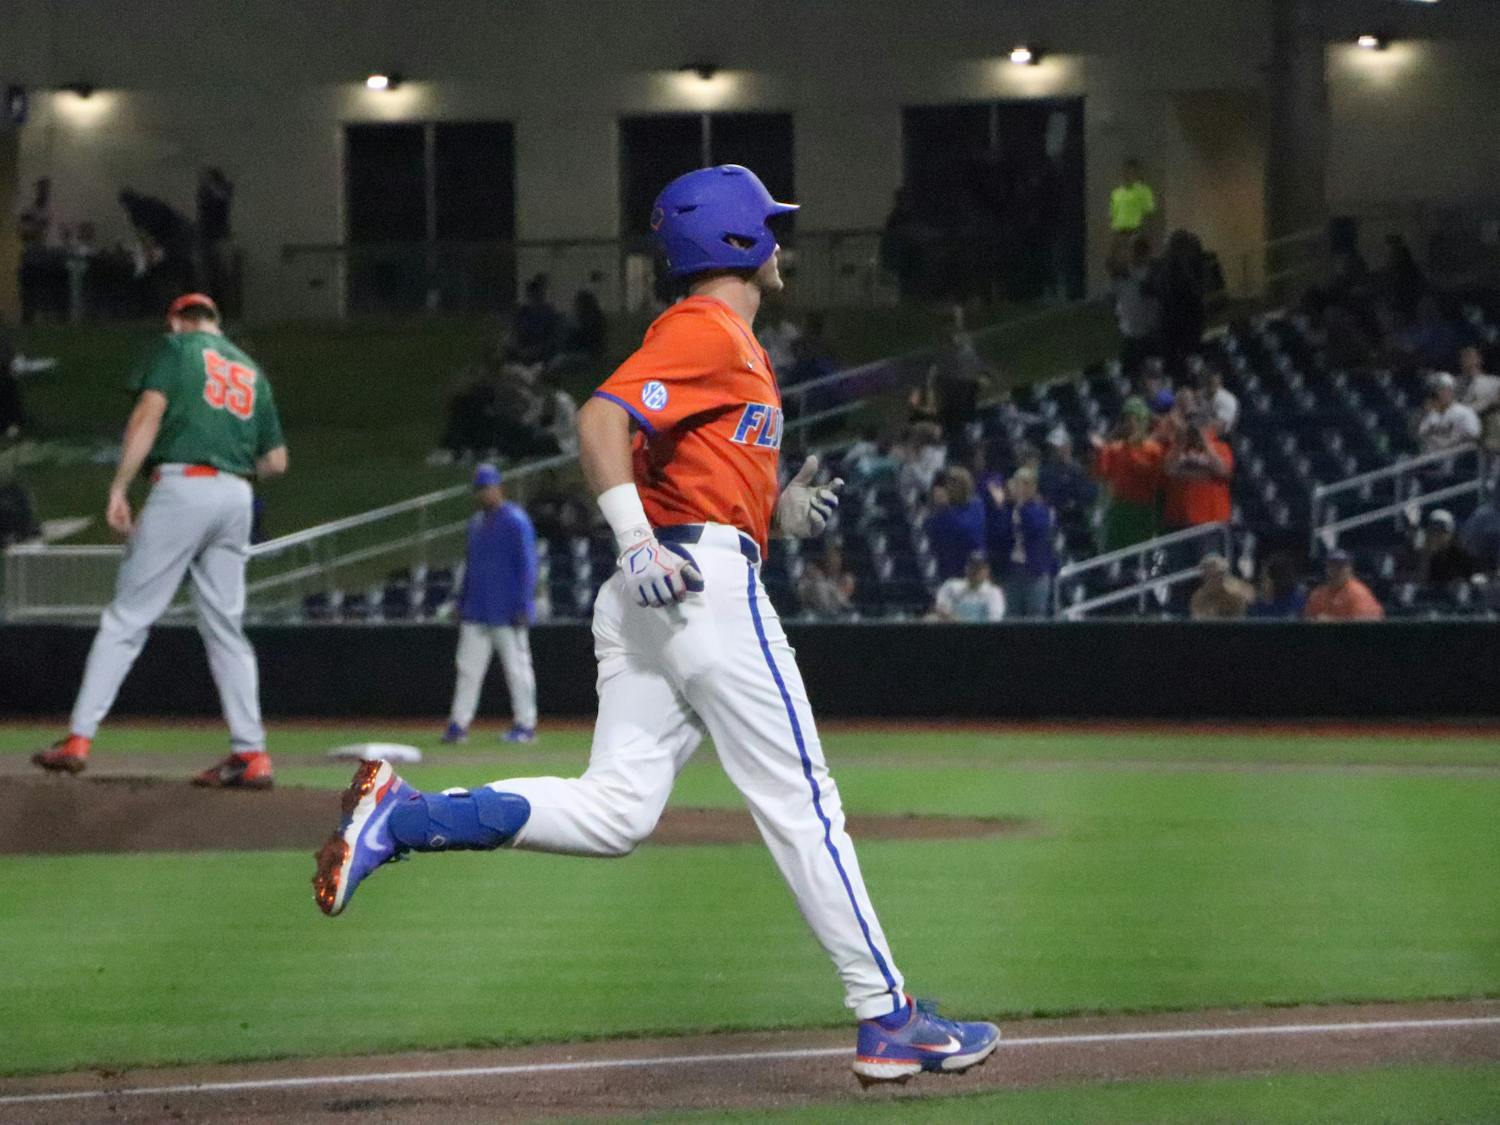 Junior outfielder Jud Fabian rounds third after a home run against Jacksonville. Florida beat Seton Hall in back-to-back games Saturday.